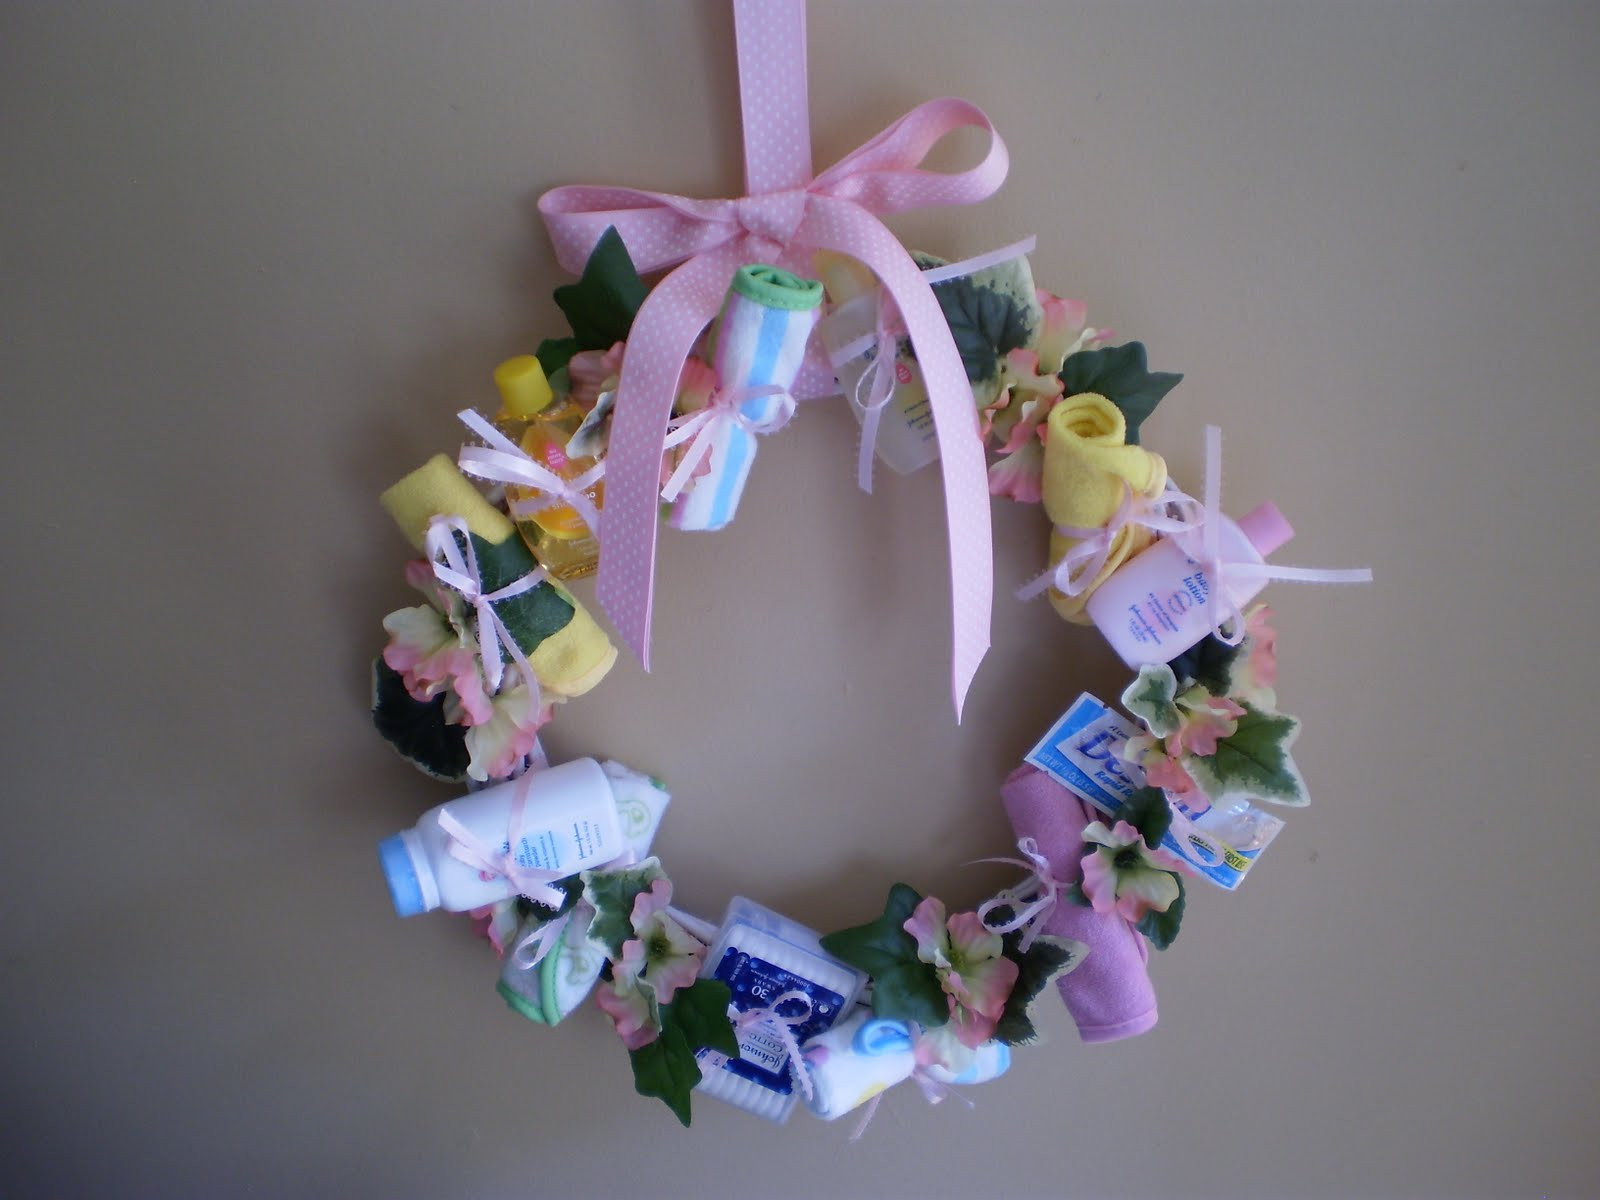 Baby Girl Shower Gift Ideas
 e Simple Country Girl A Neat Baby Shower Gift Idea